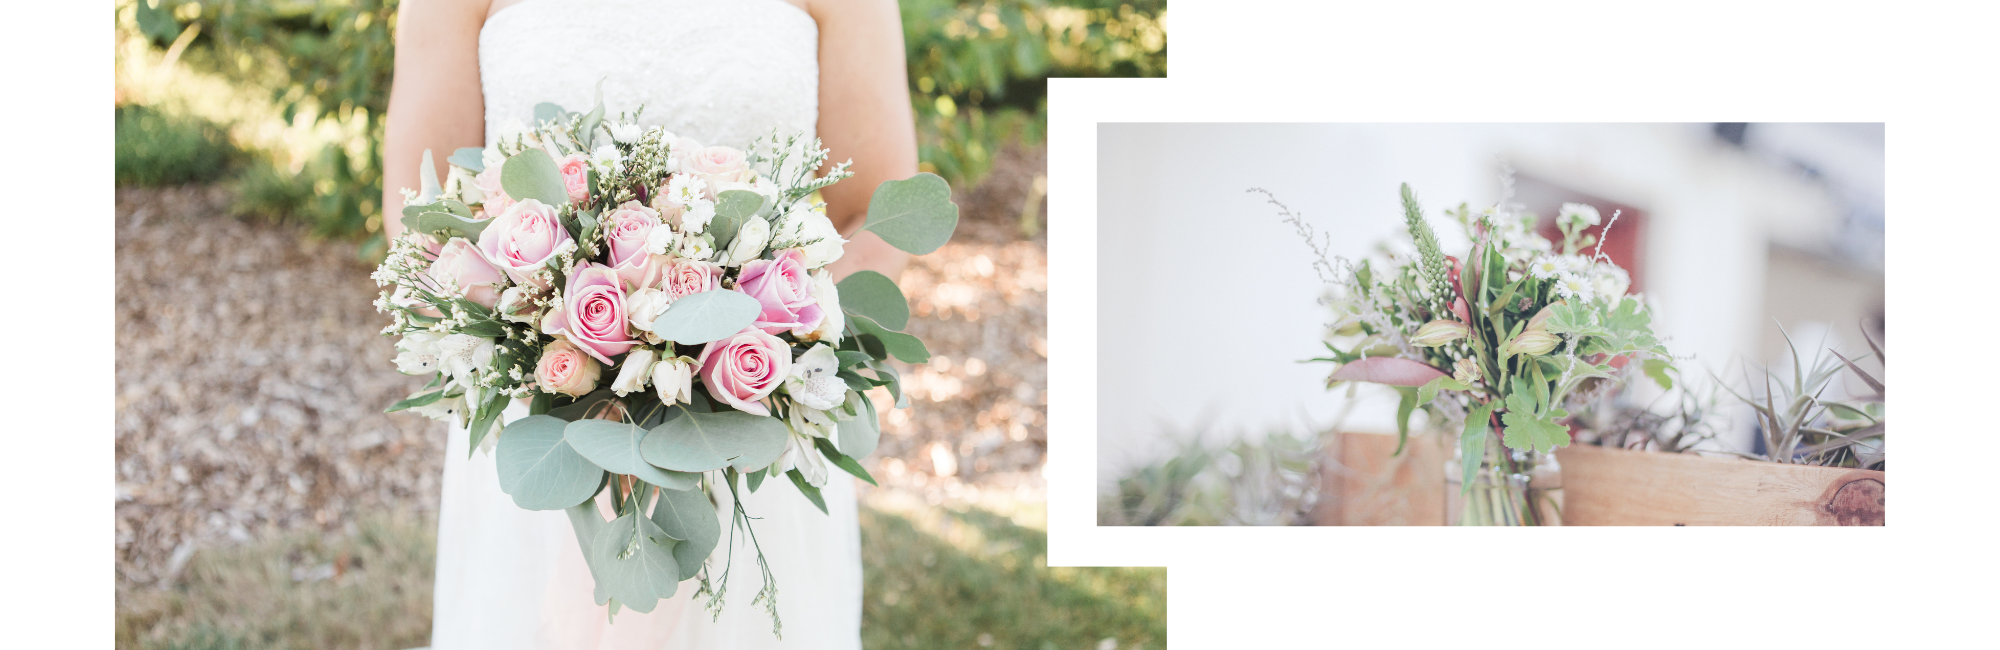 Wedding bouquet and beautiful florals in a vase